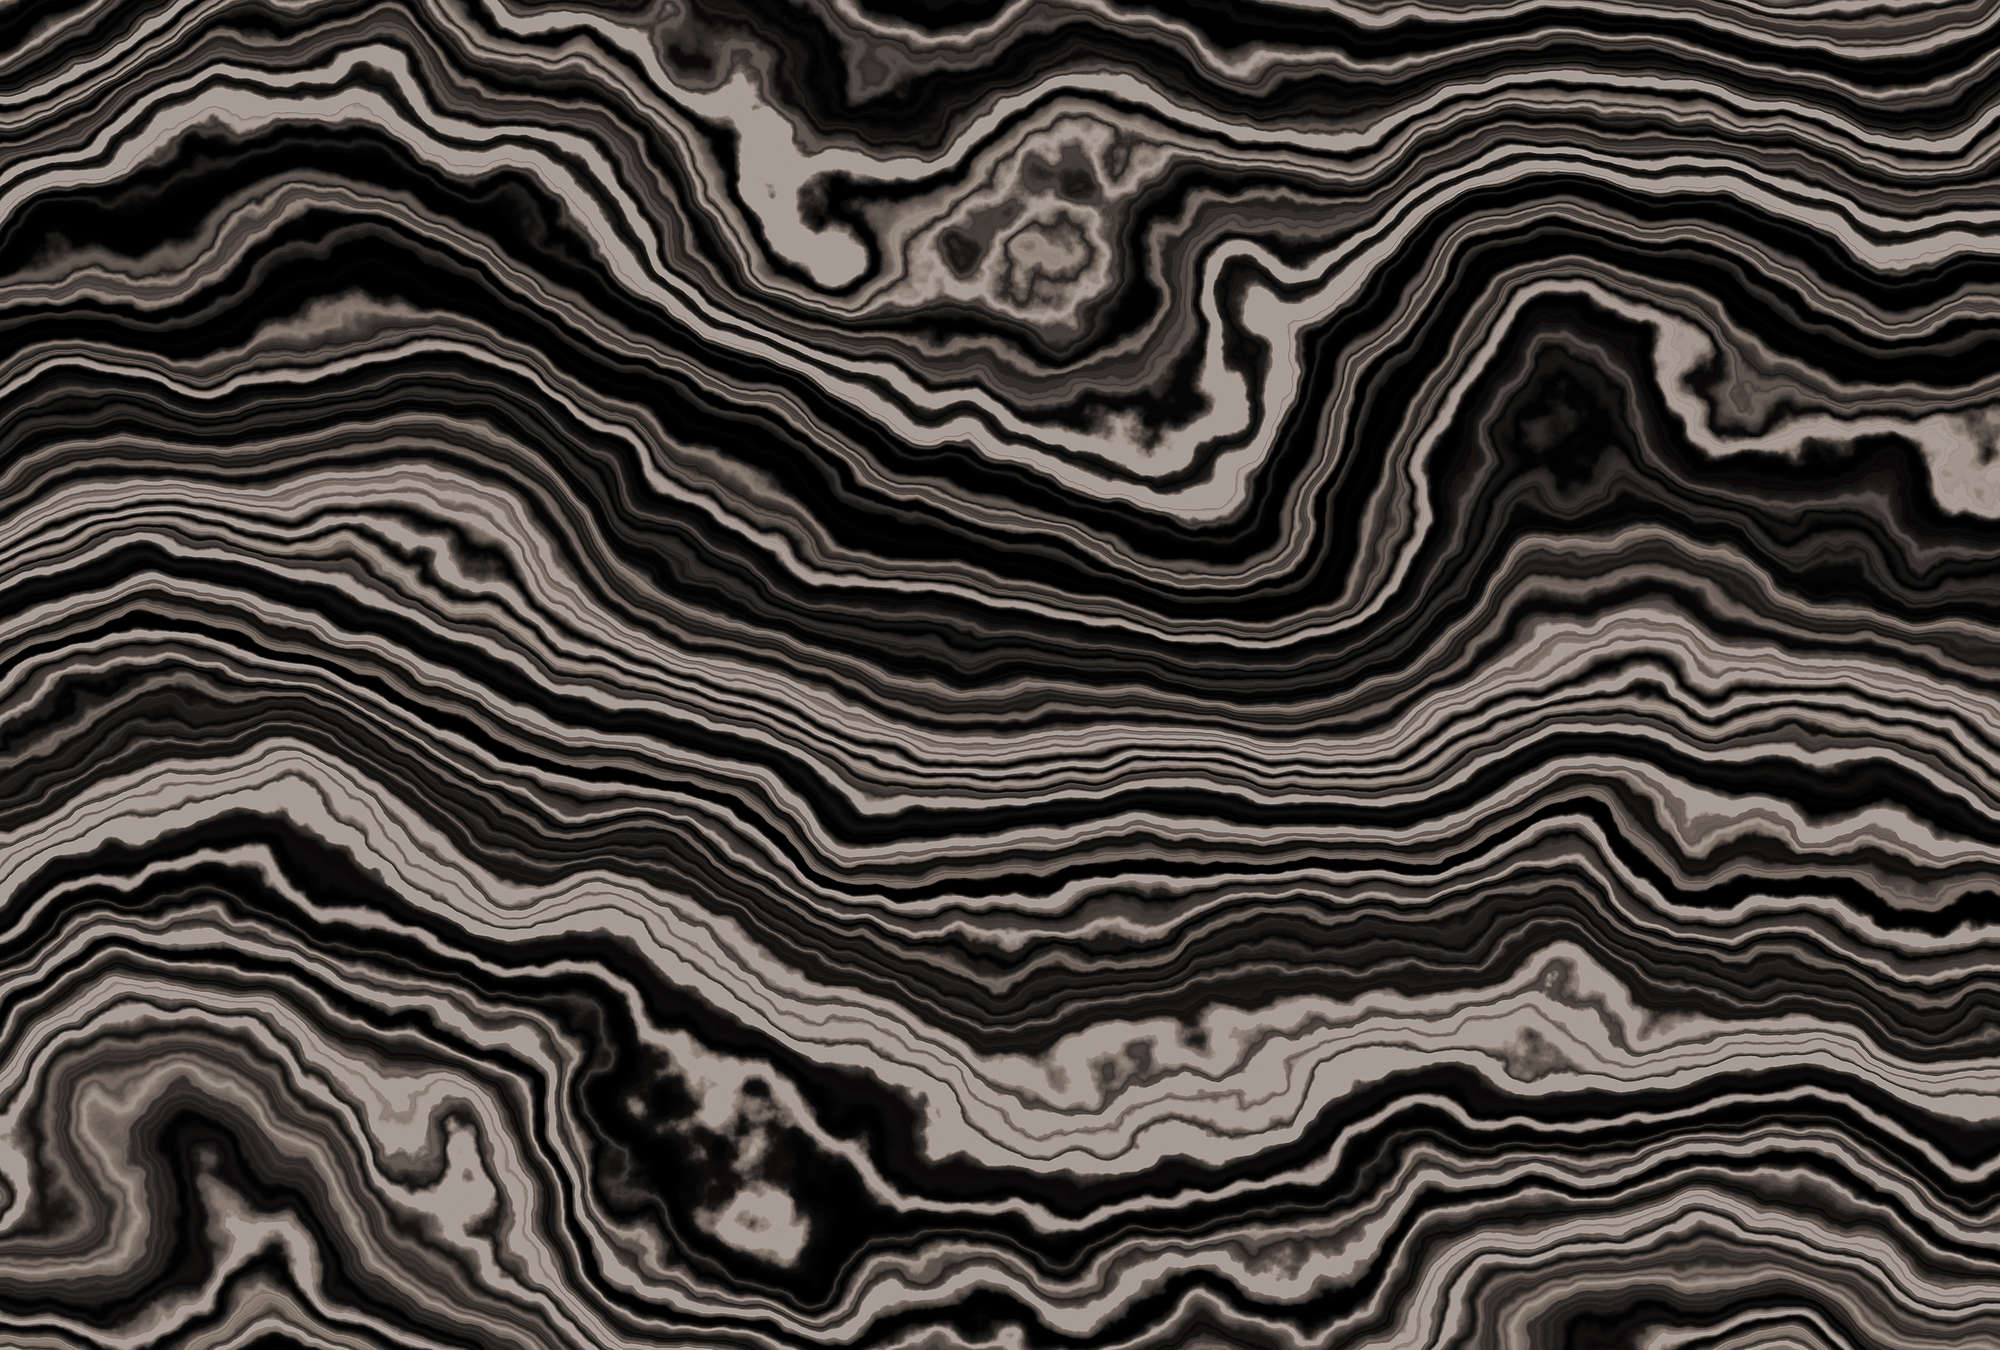             Onyx 2 - Cross-section of an onyx marble as photo wallpaper - Beige, Black | Pearl smooth non-woven
        